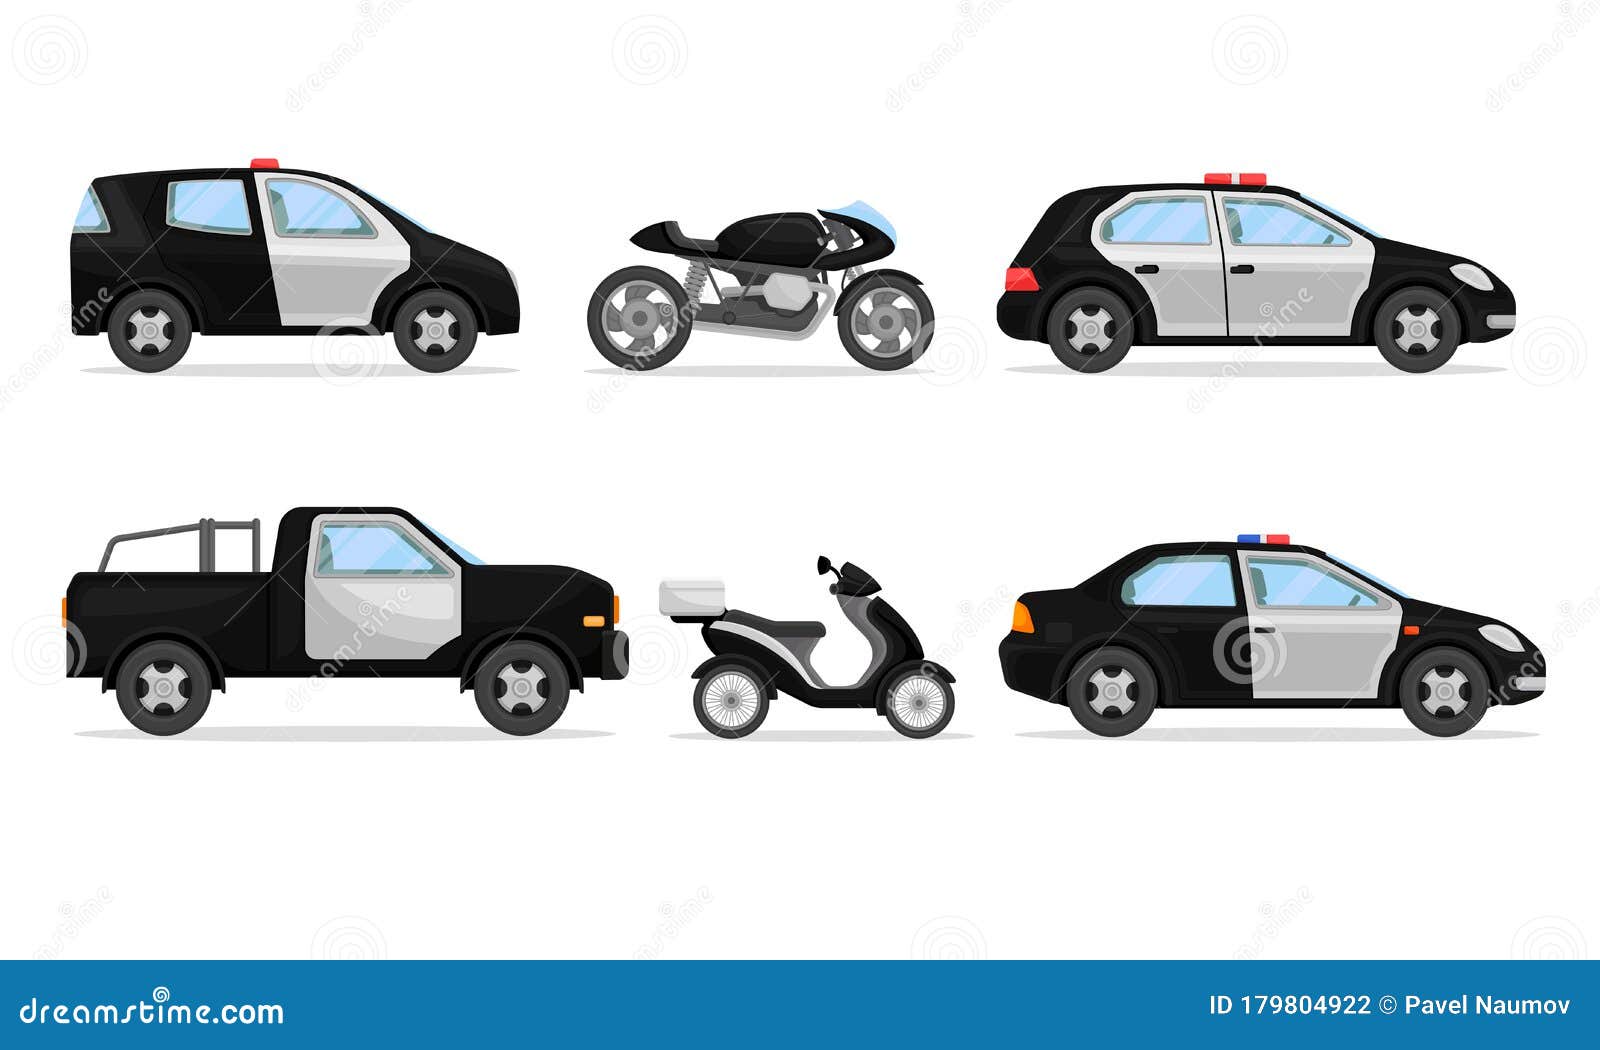 Police Vehicles With Patrol Car And Motorcycle Vector Set Stock Vector